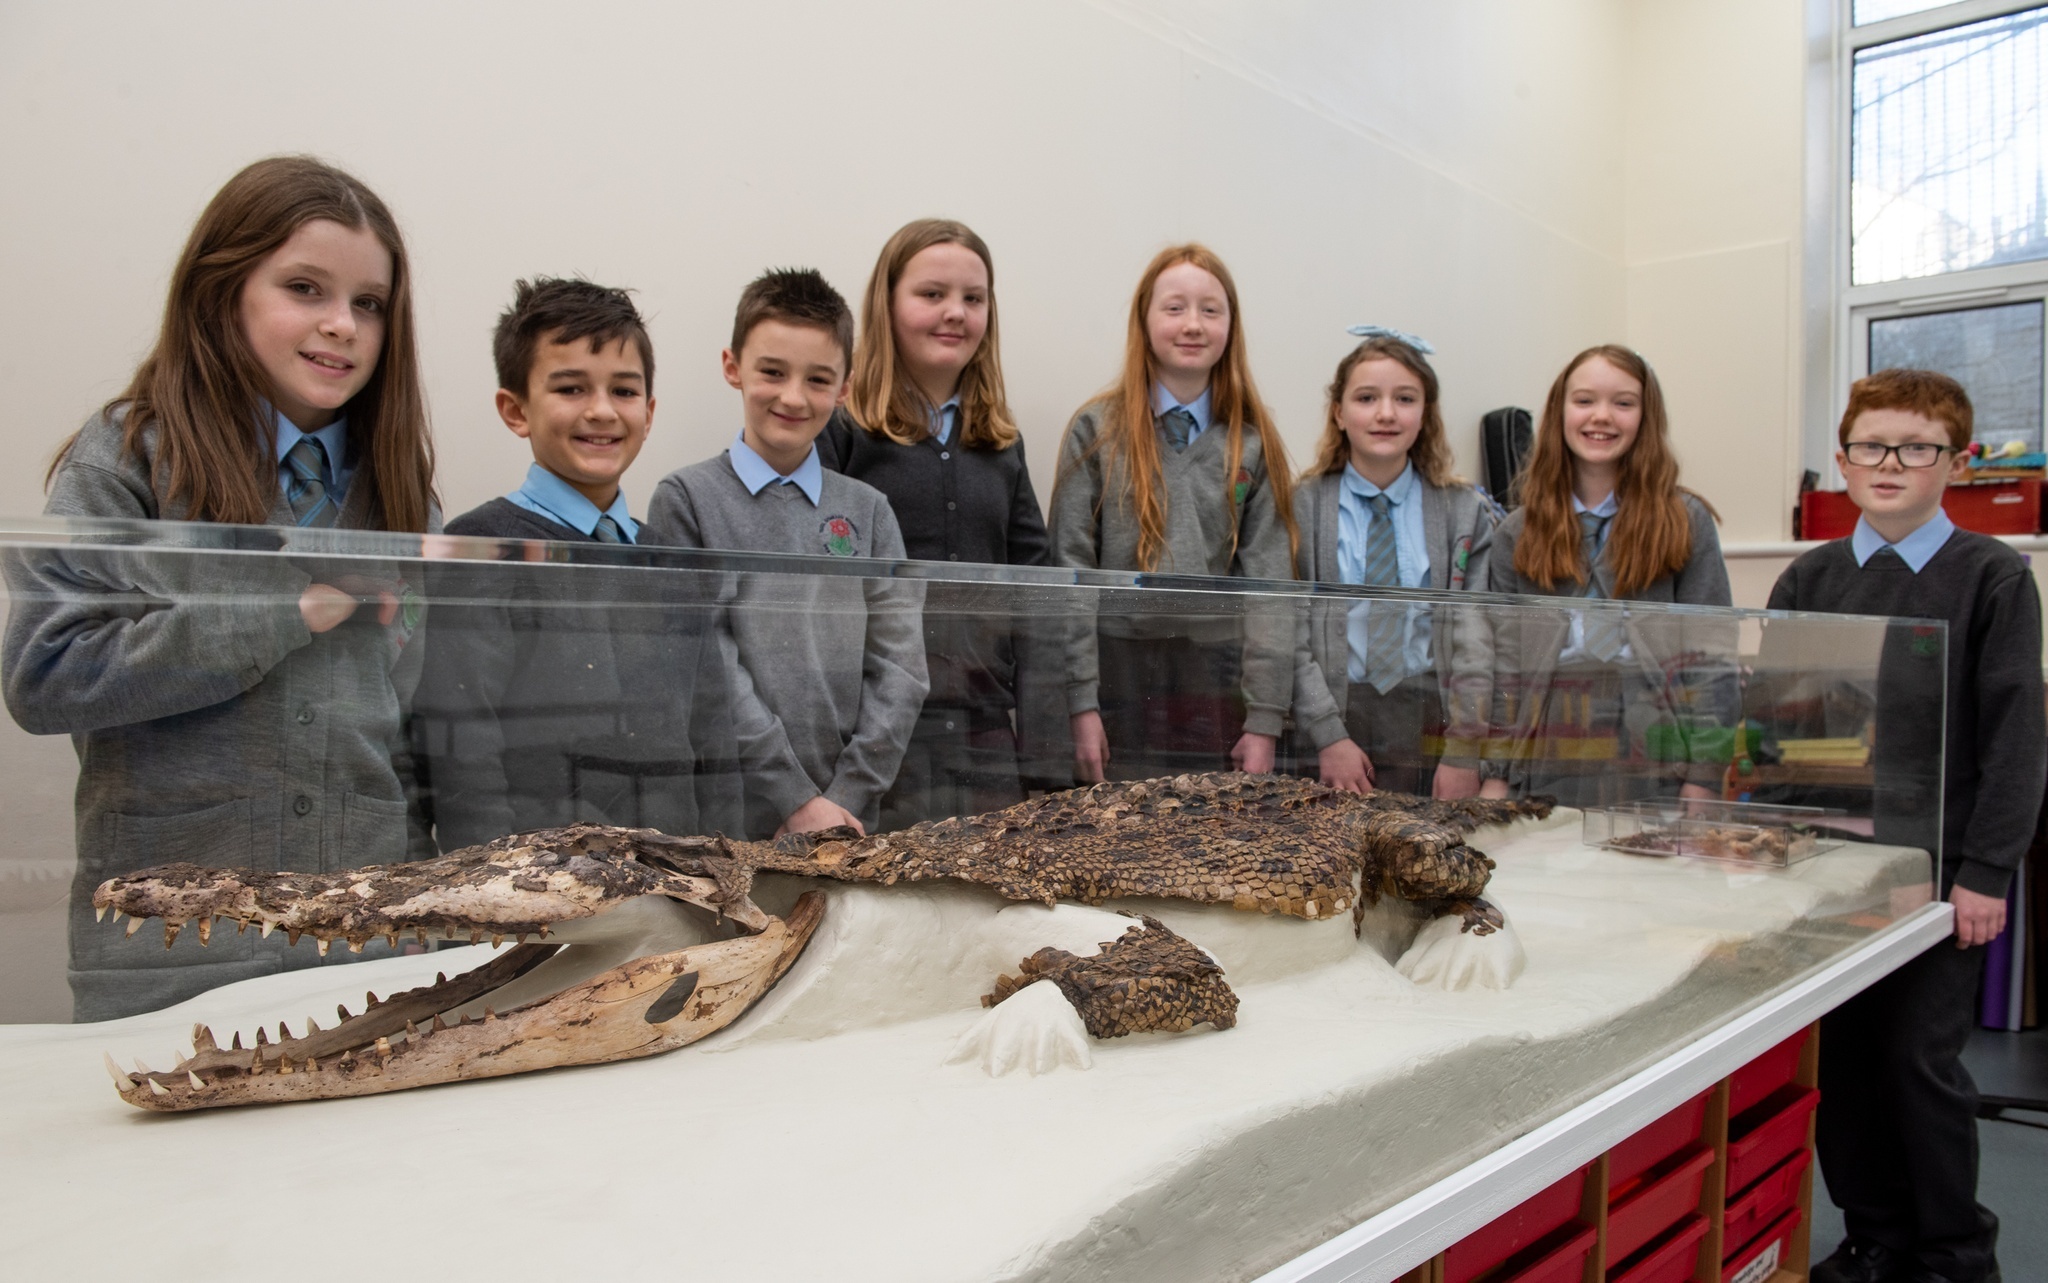 Pupils stand next to the displayed remains of a 102-year-old crocodile